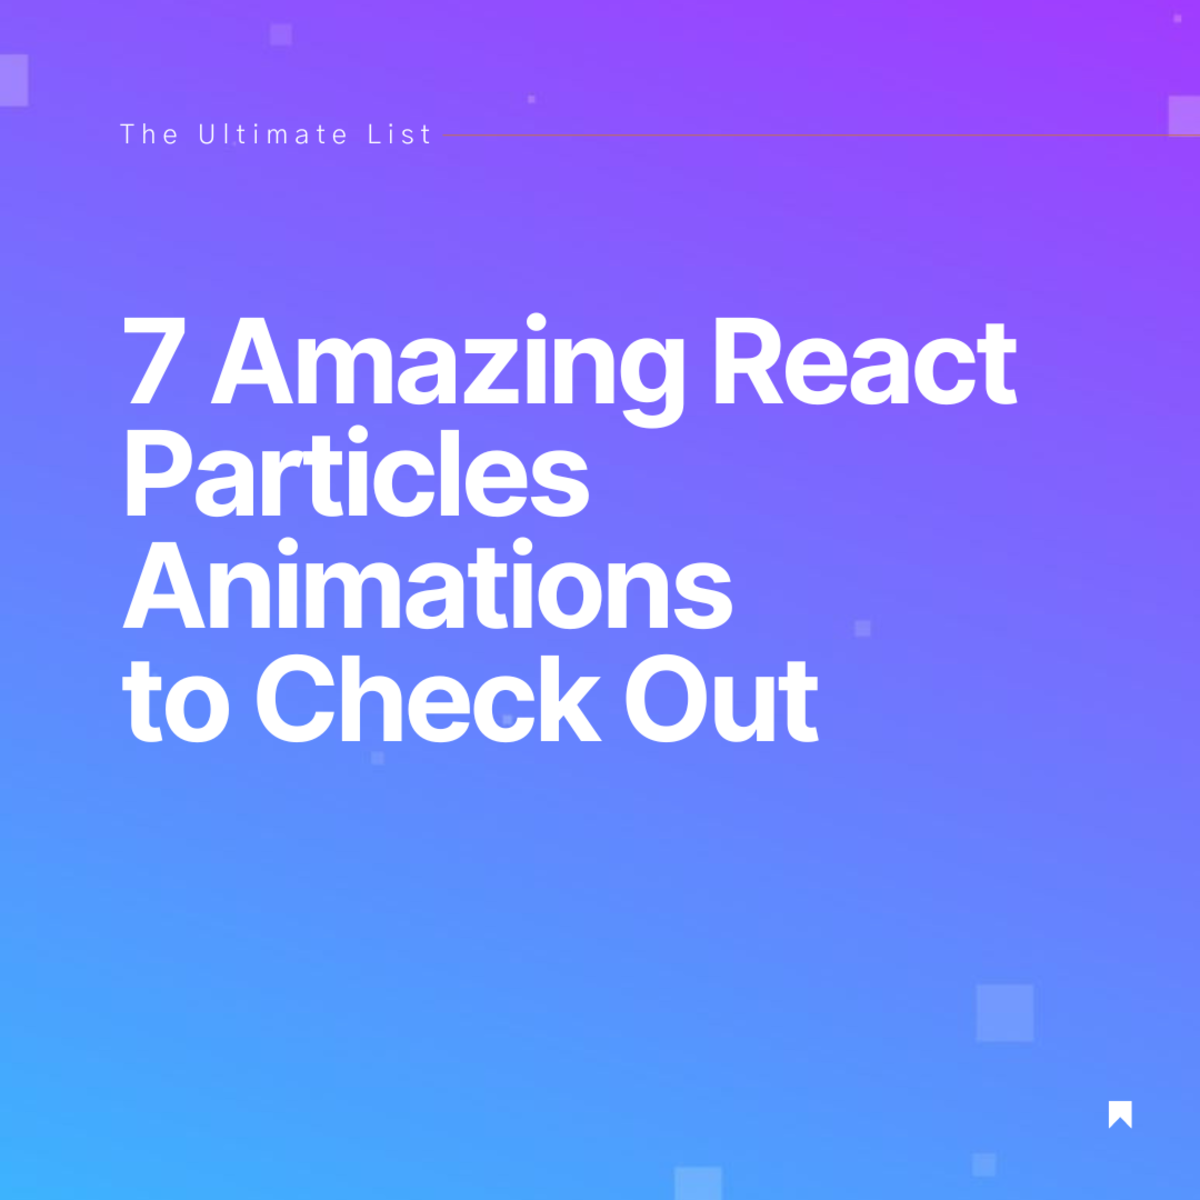 7 Amazing React Particles Animations to Check Out